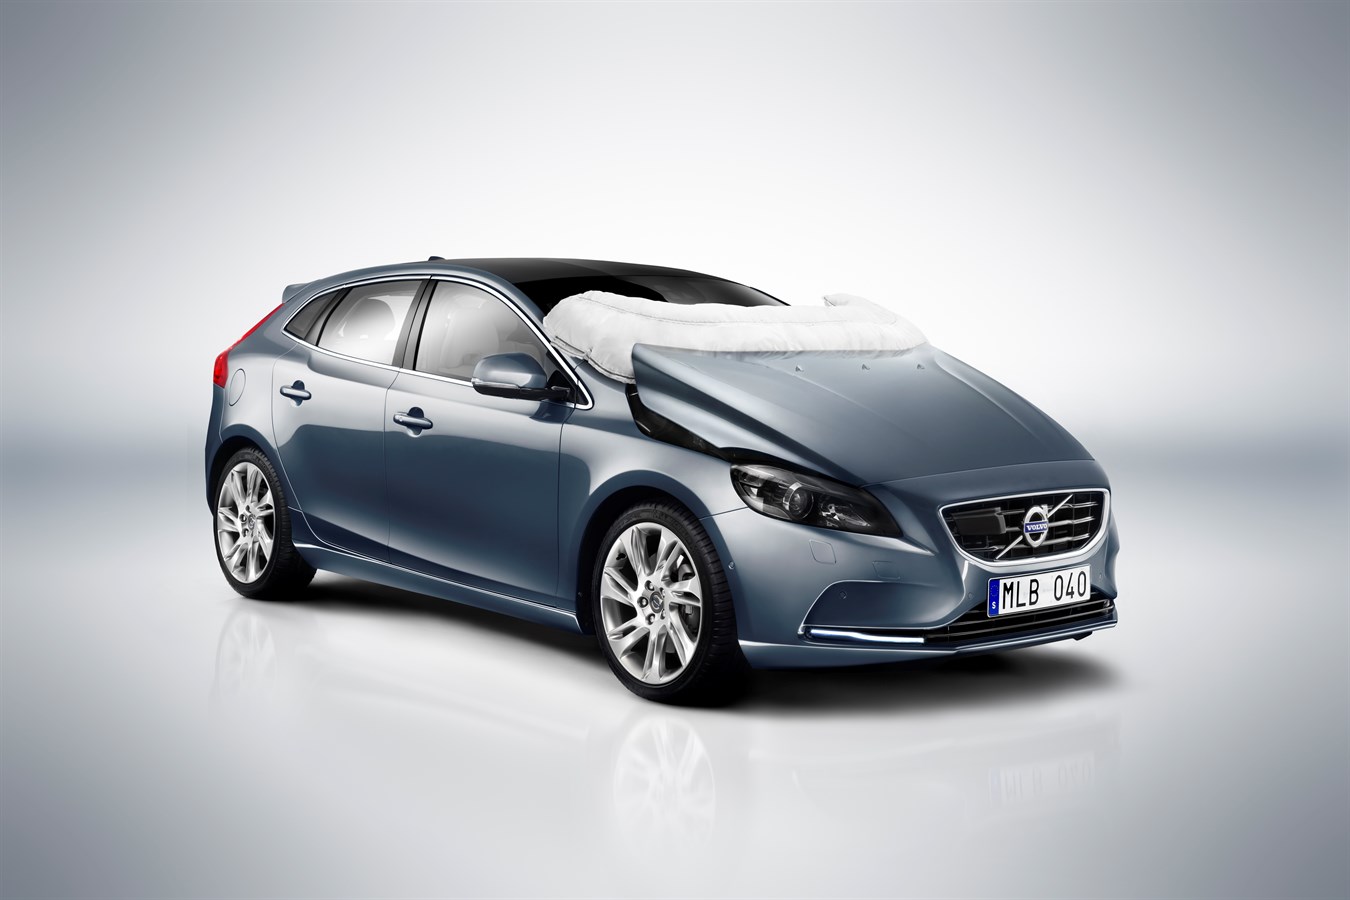 The all-new Volvo V40 – Pedestrian Airbag Technology